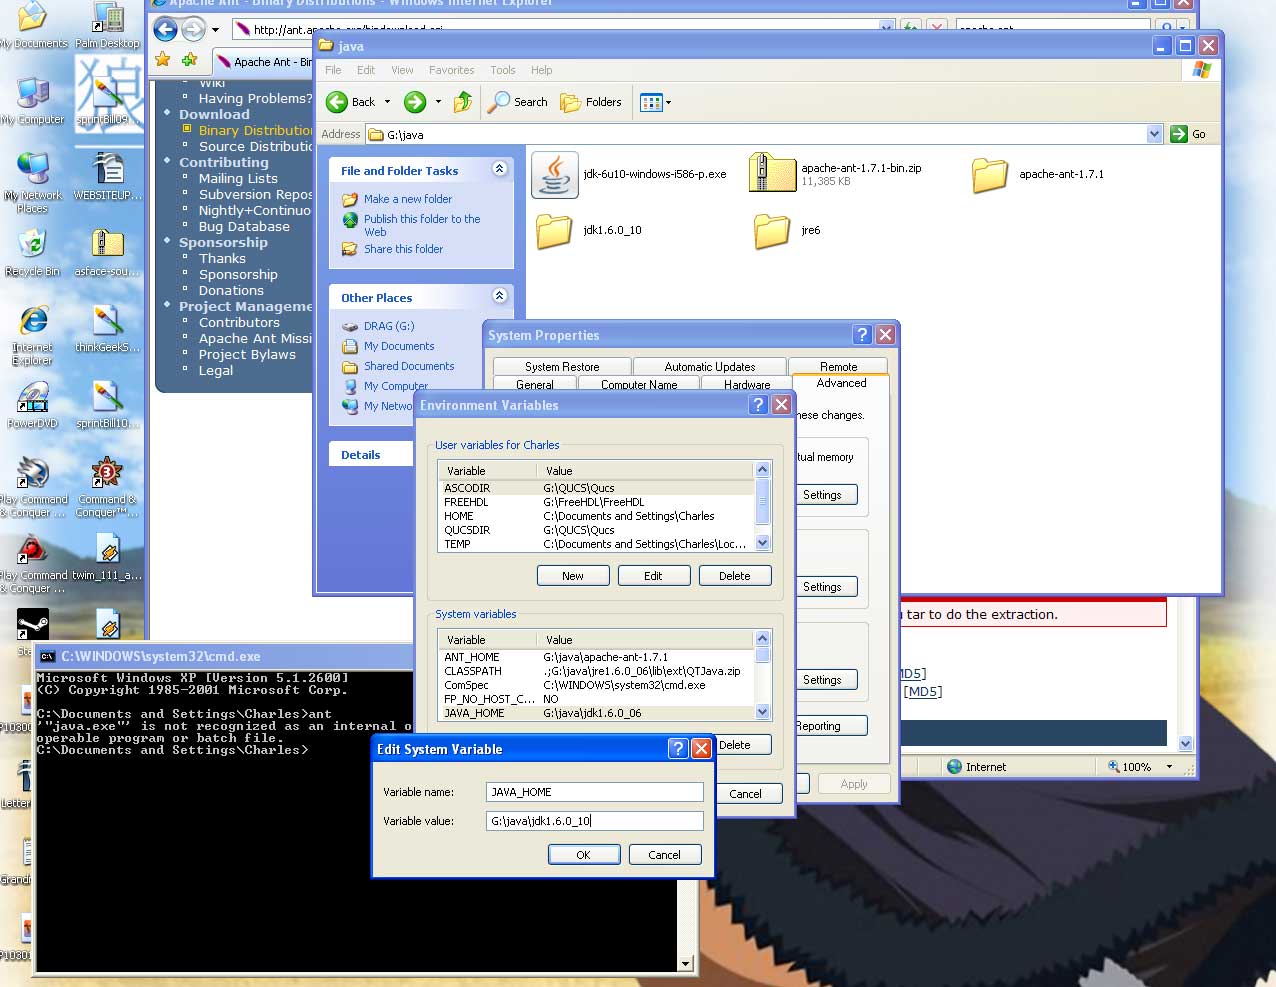 A screencapture showing the pannel used to edit environment variables